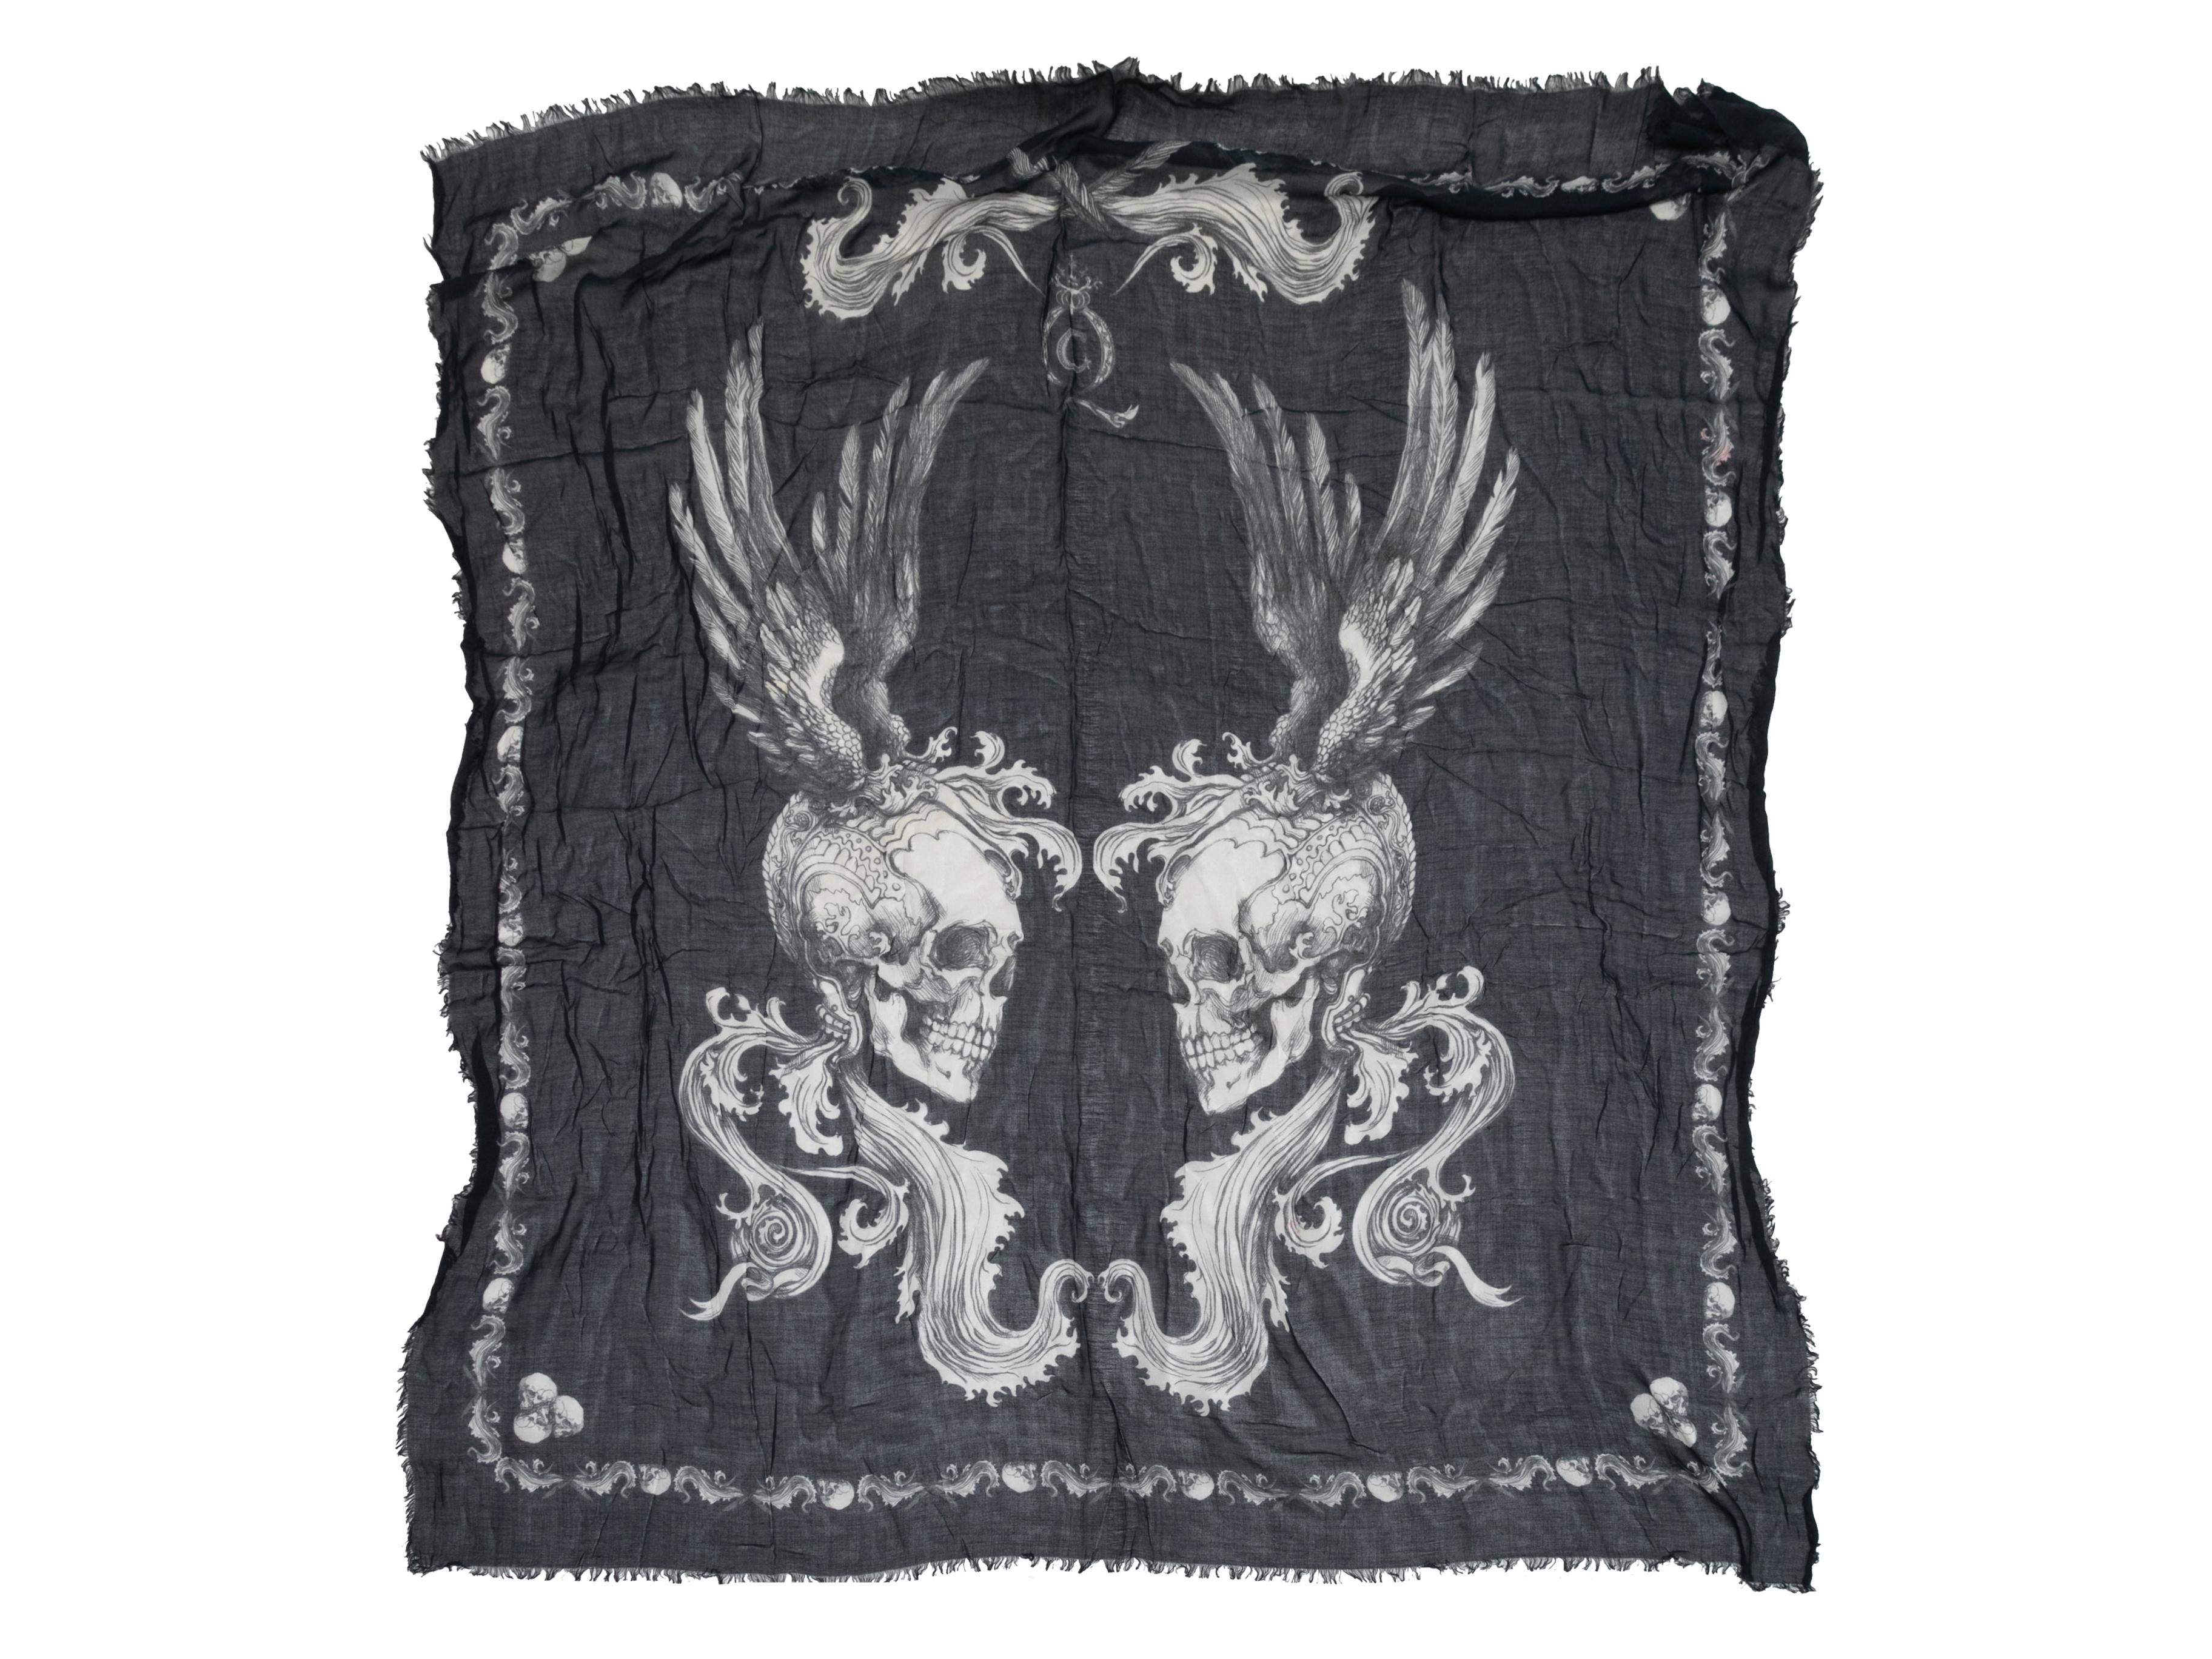 Vintage Black & White Alexander McQueen Skull Print Scarf In Good Condition For Sale In New York, NY